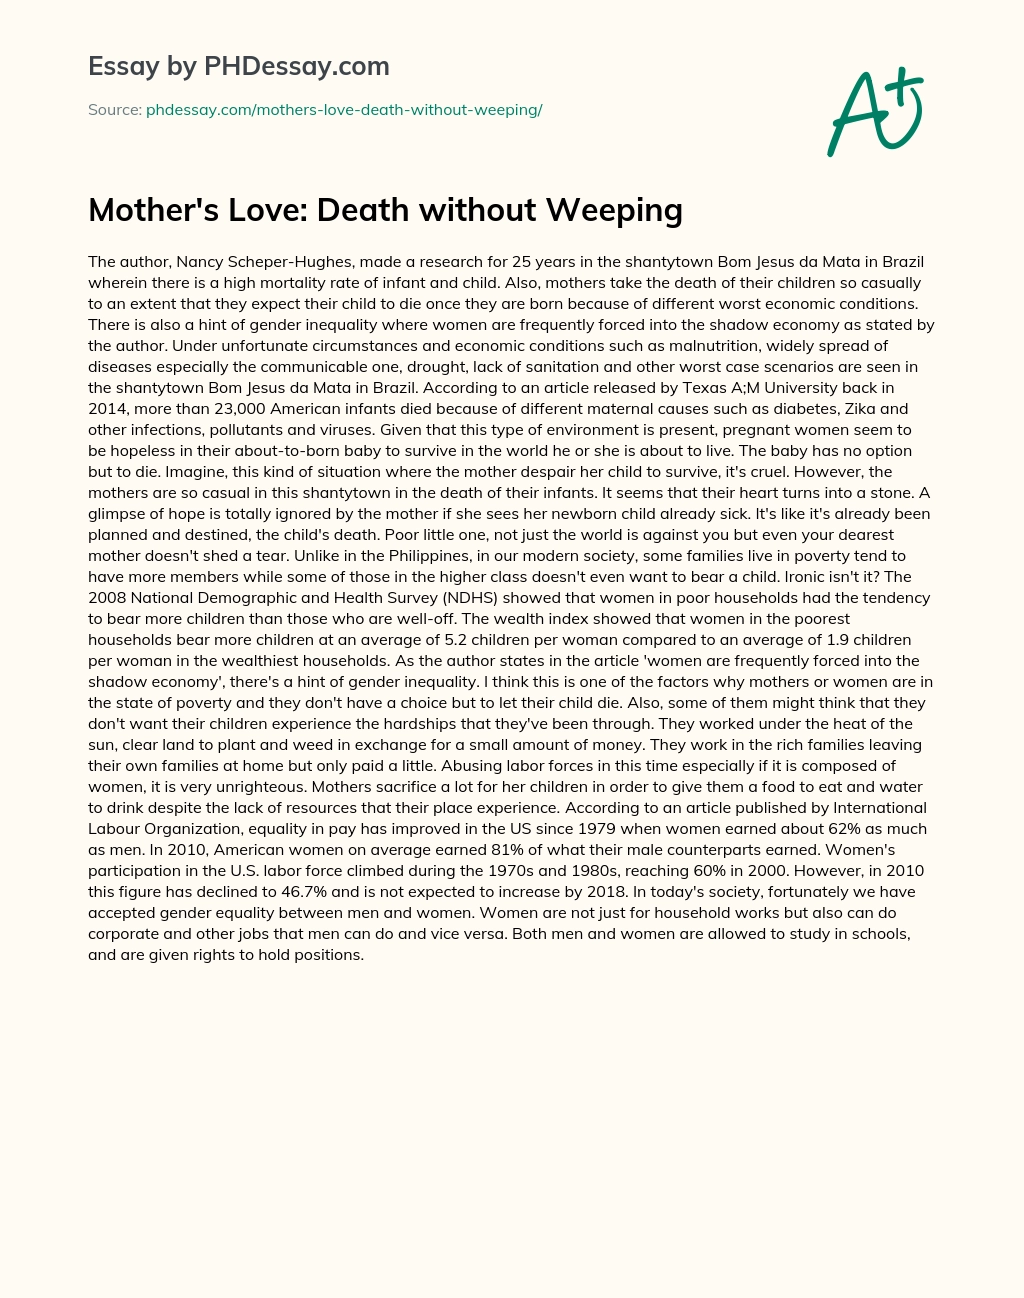 Mother’s Love: Death without Weeping essay